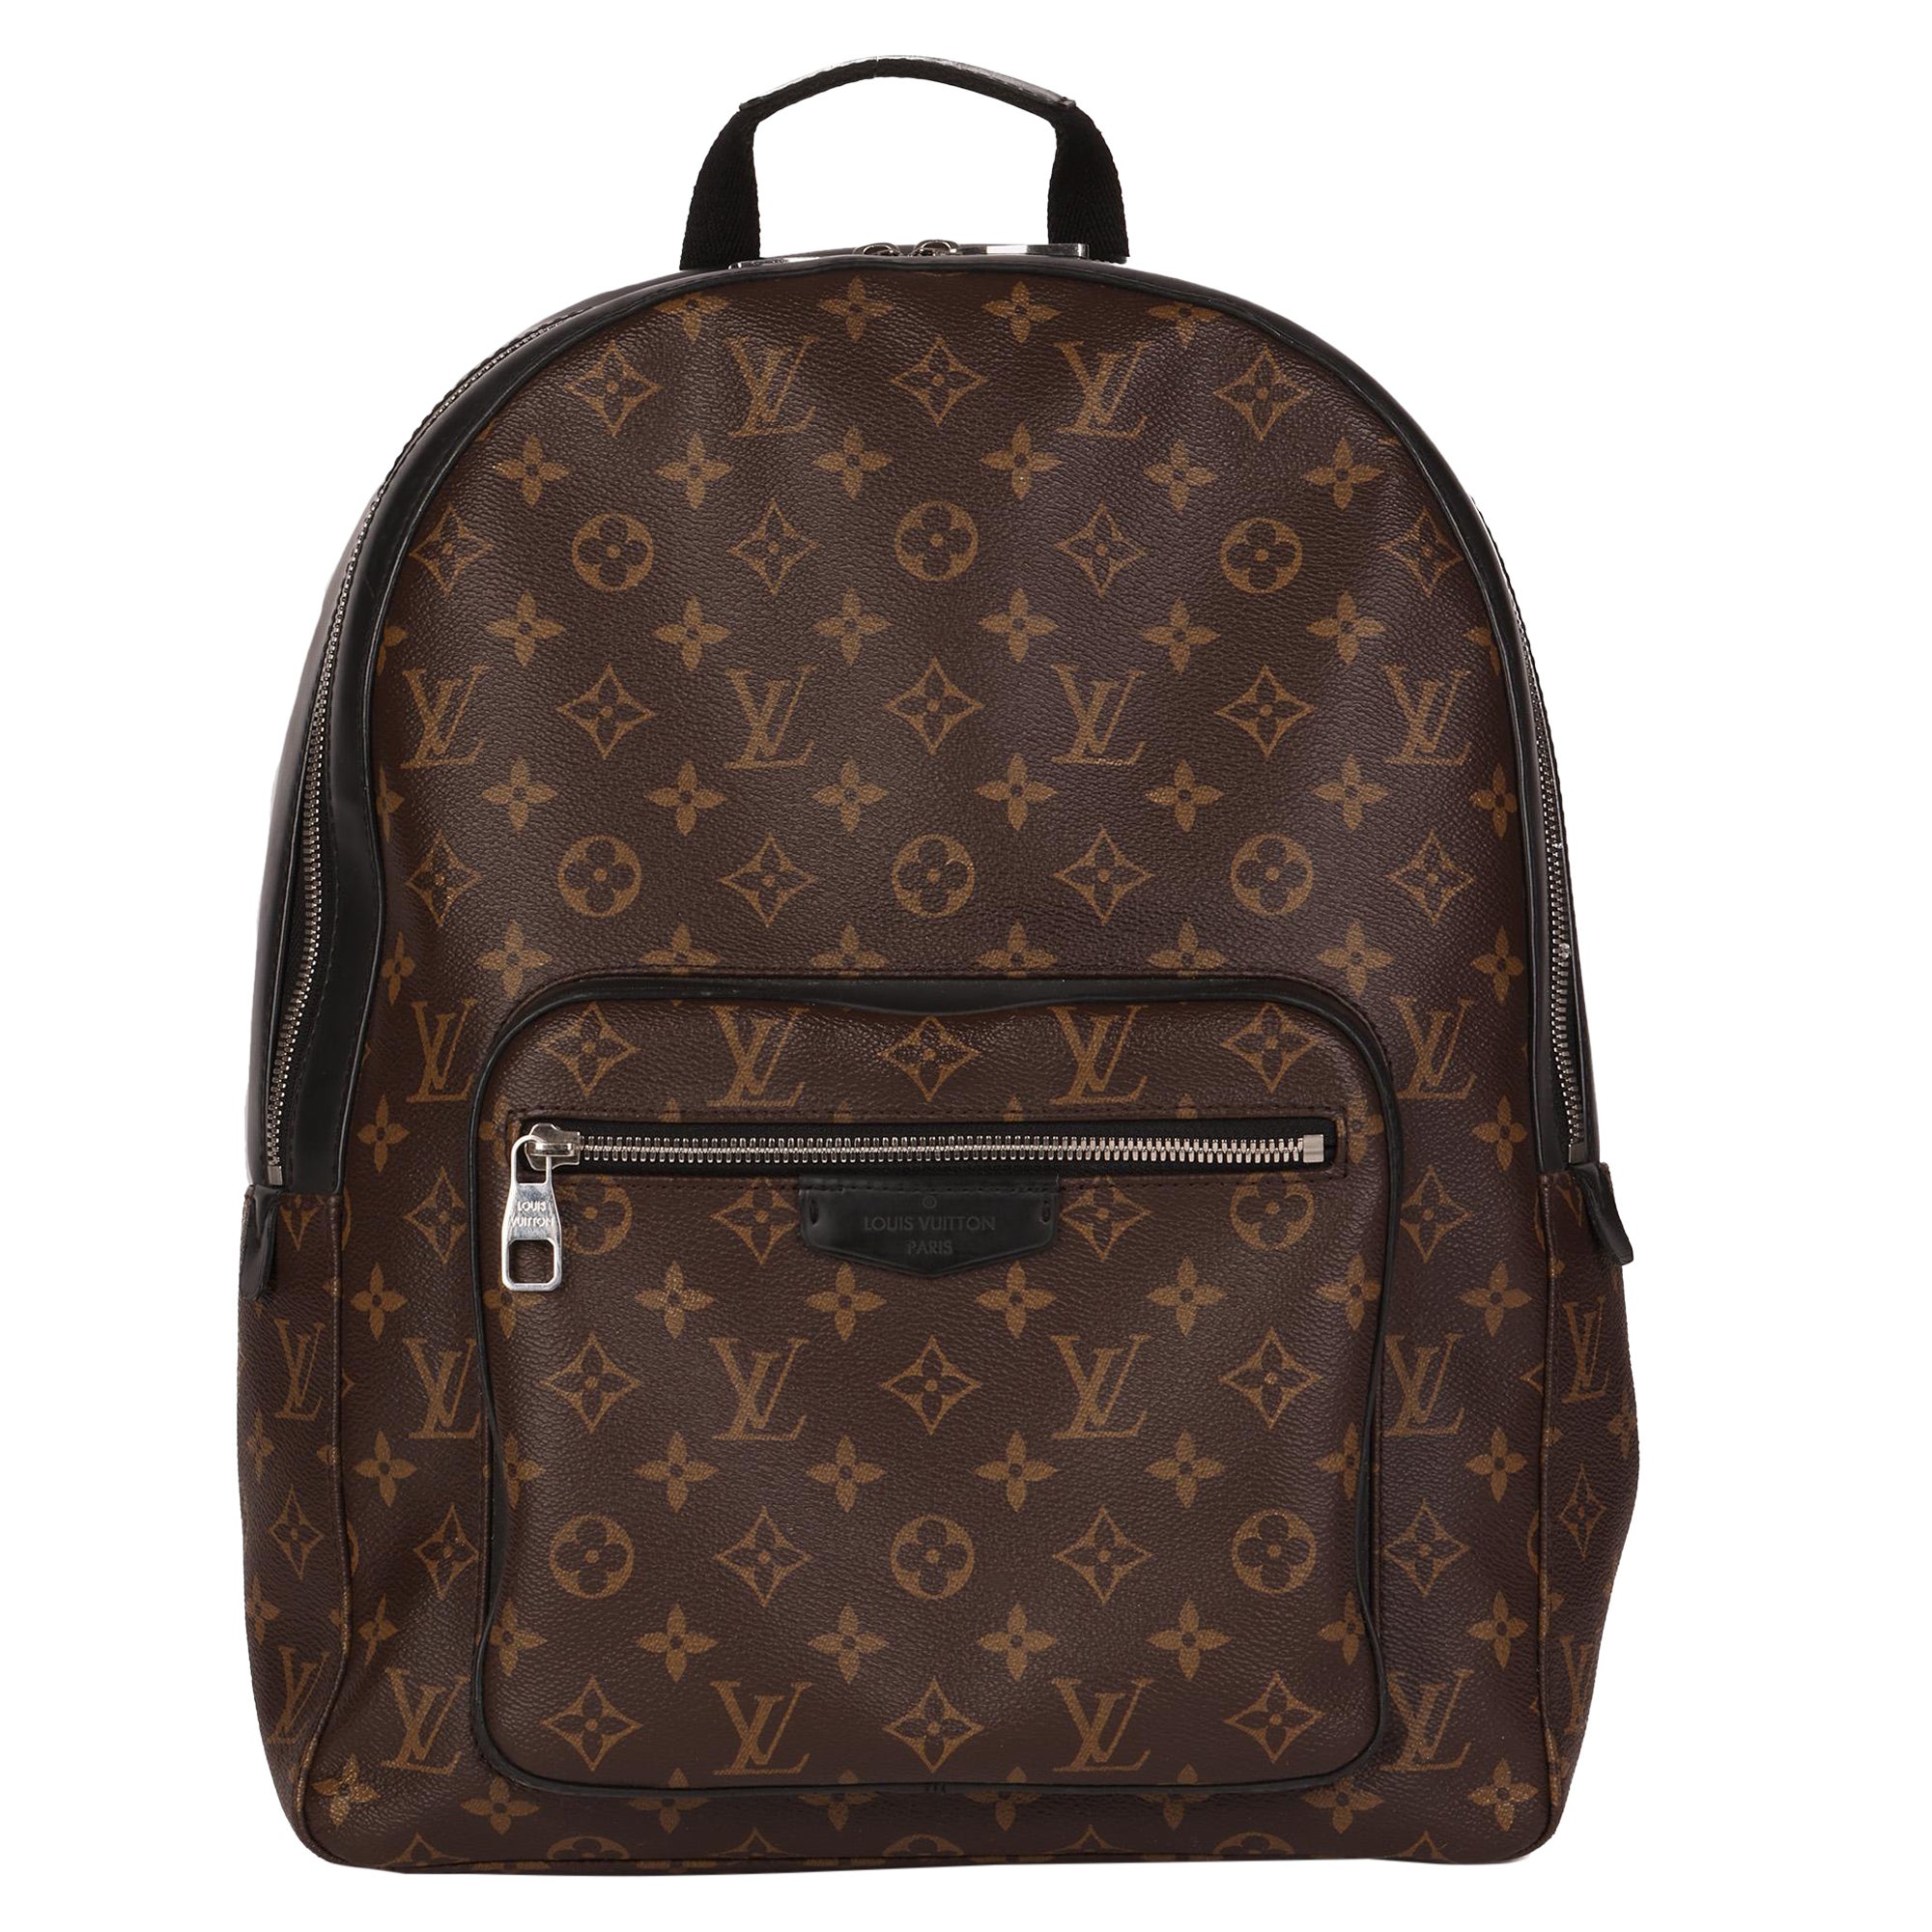 Louis Vuitton Josh Backpack, Monogram, Preowned in Dustbag WA001